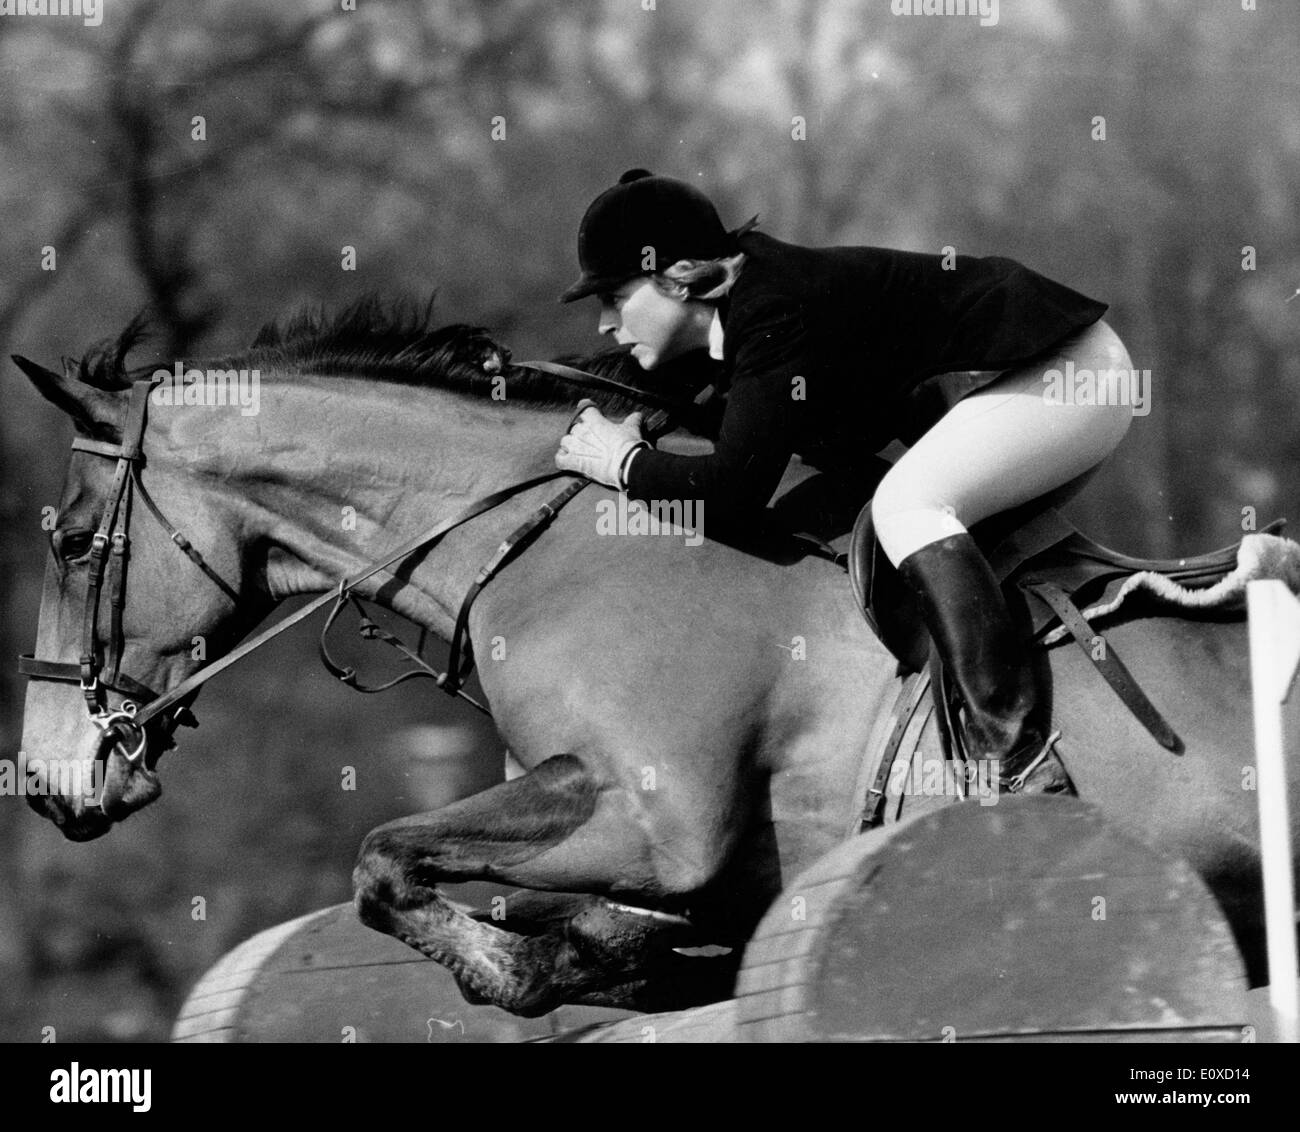 World champion MARION COAKES taking one of the jumps on her horse Little Fellow Stock Photo